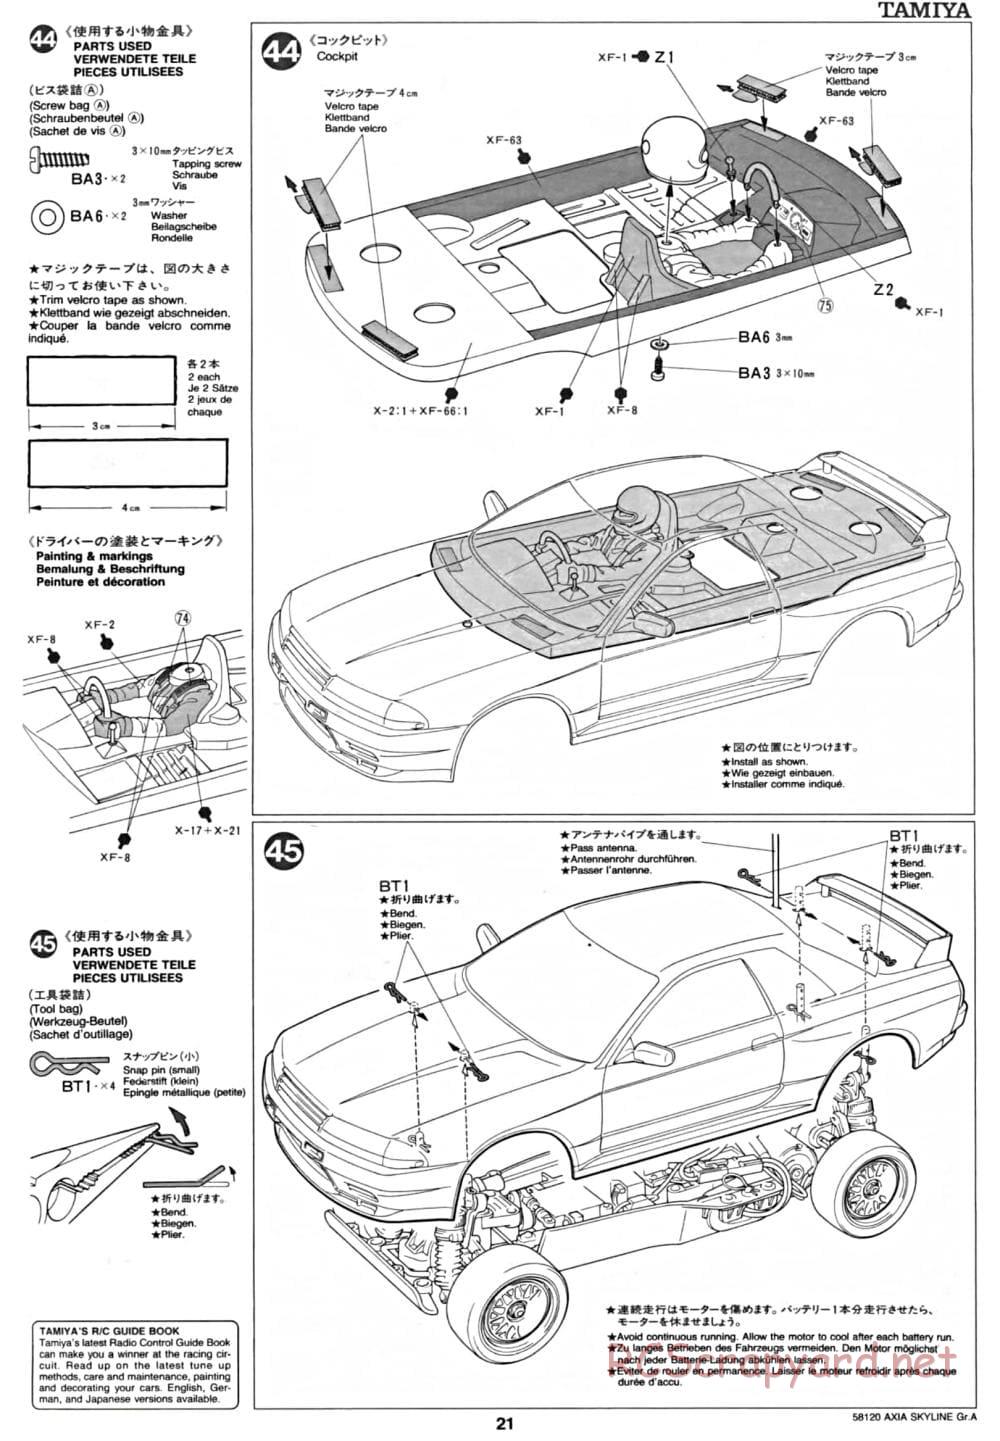 Tamiya - Axia Skyline GT-R Gr.A - TA-01 Chassis - Manual - Page 22